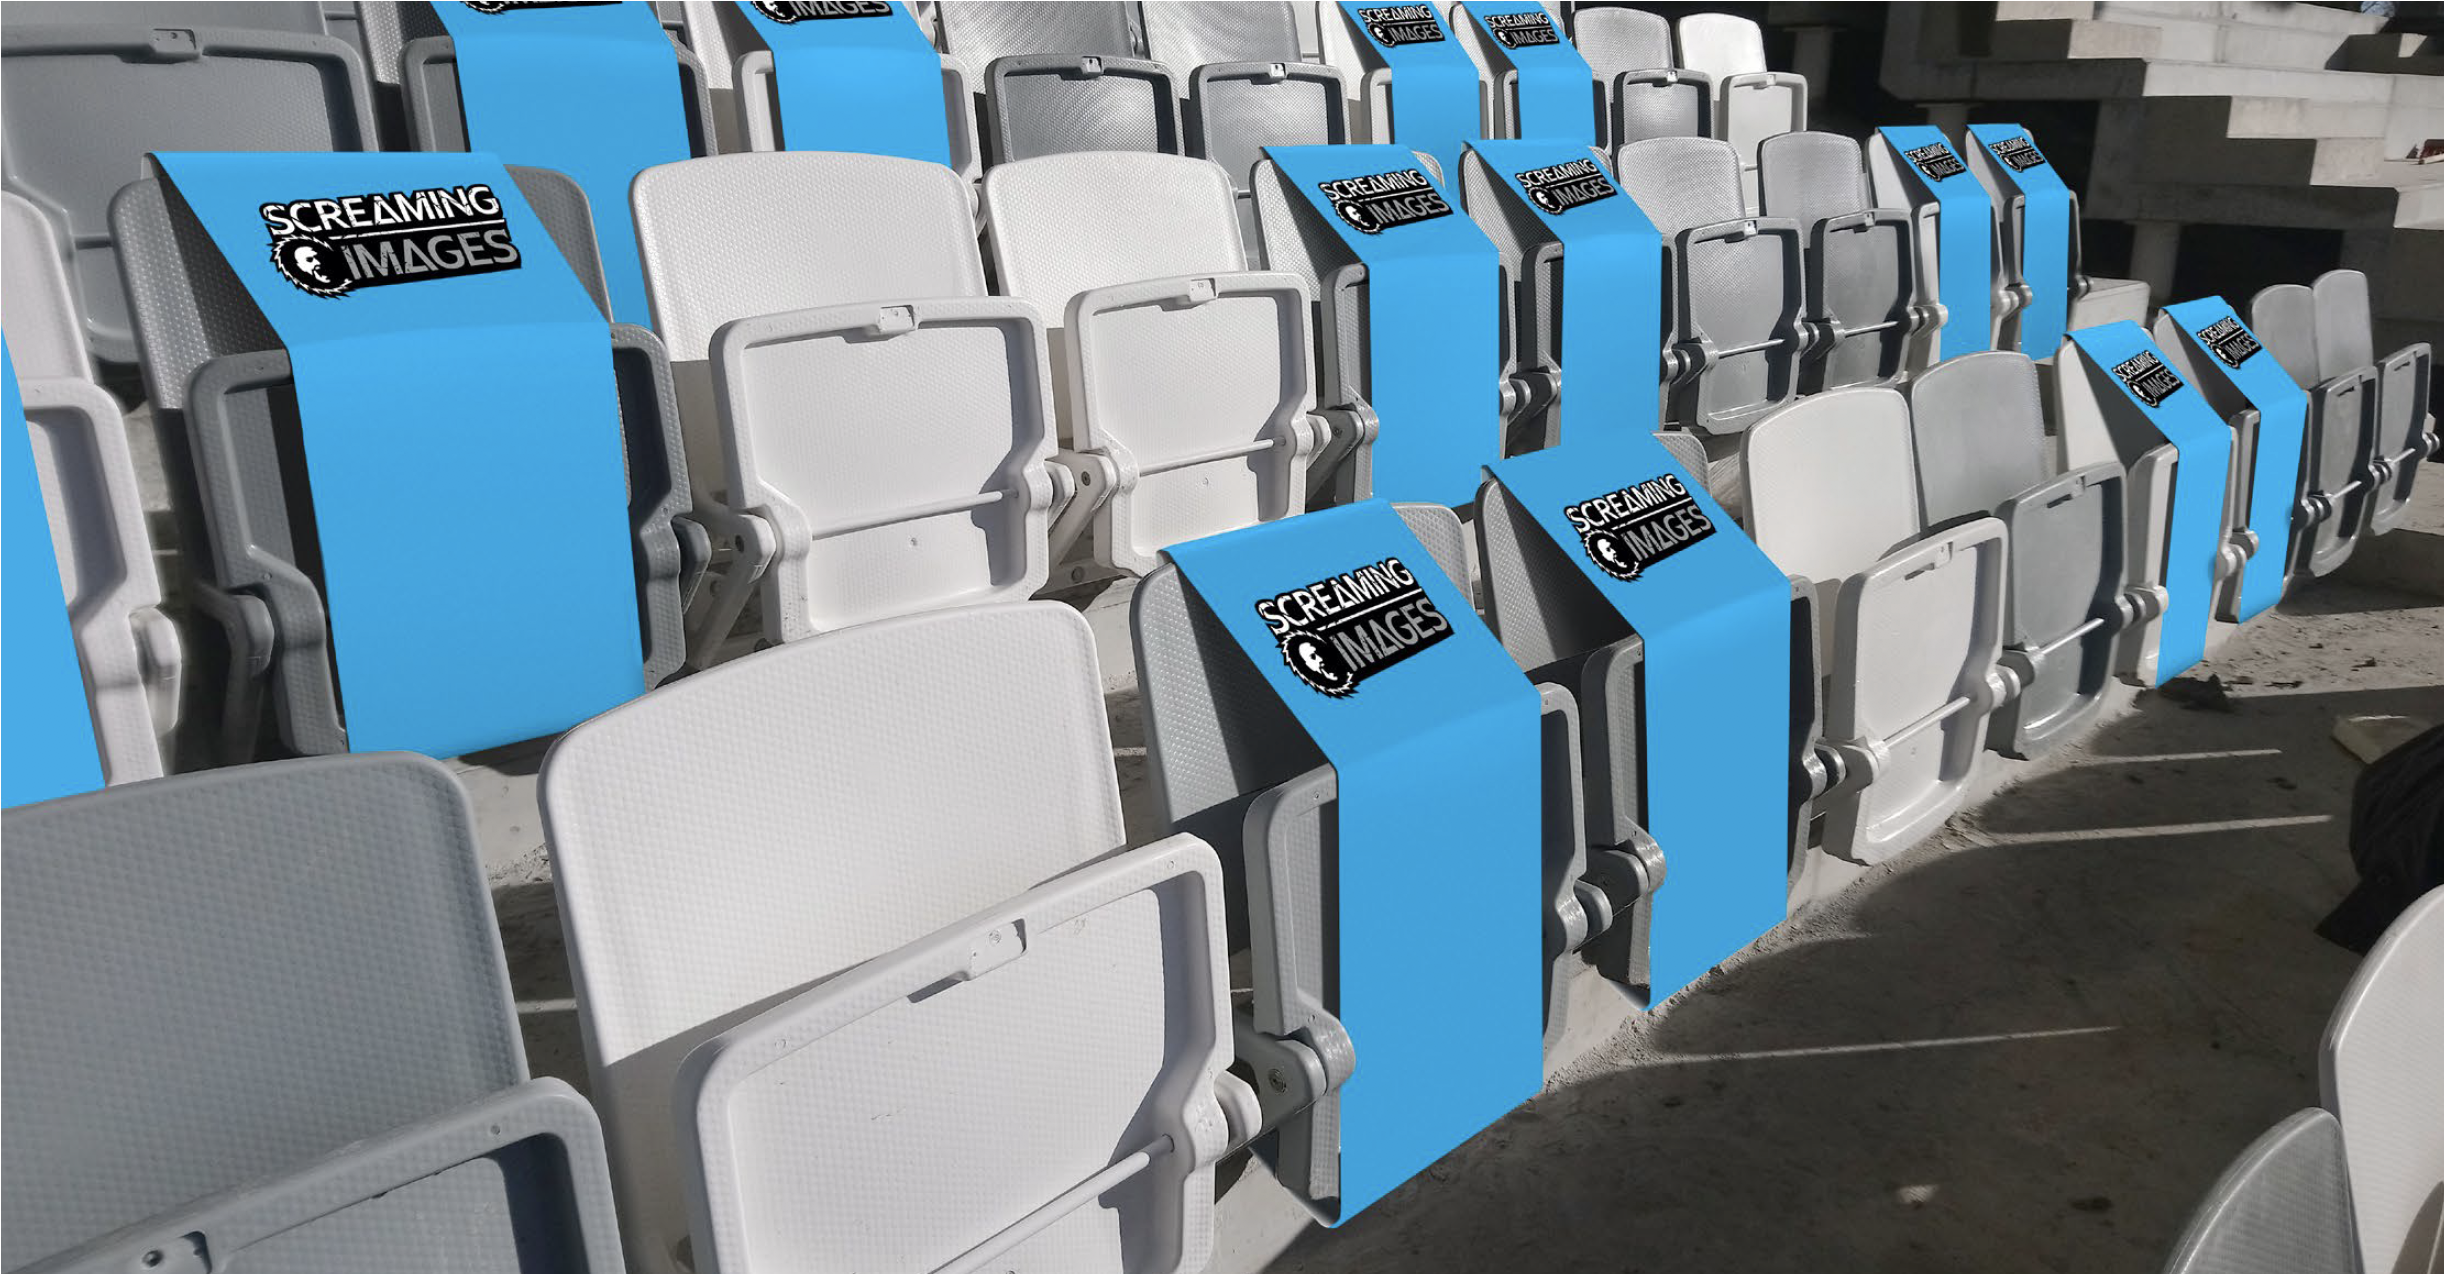 Rendering of what vinyl seat covers would look like to promote social distancing protocols at a ...